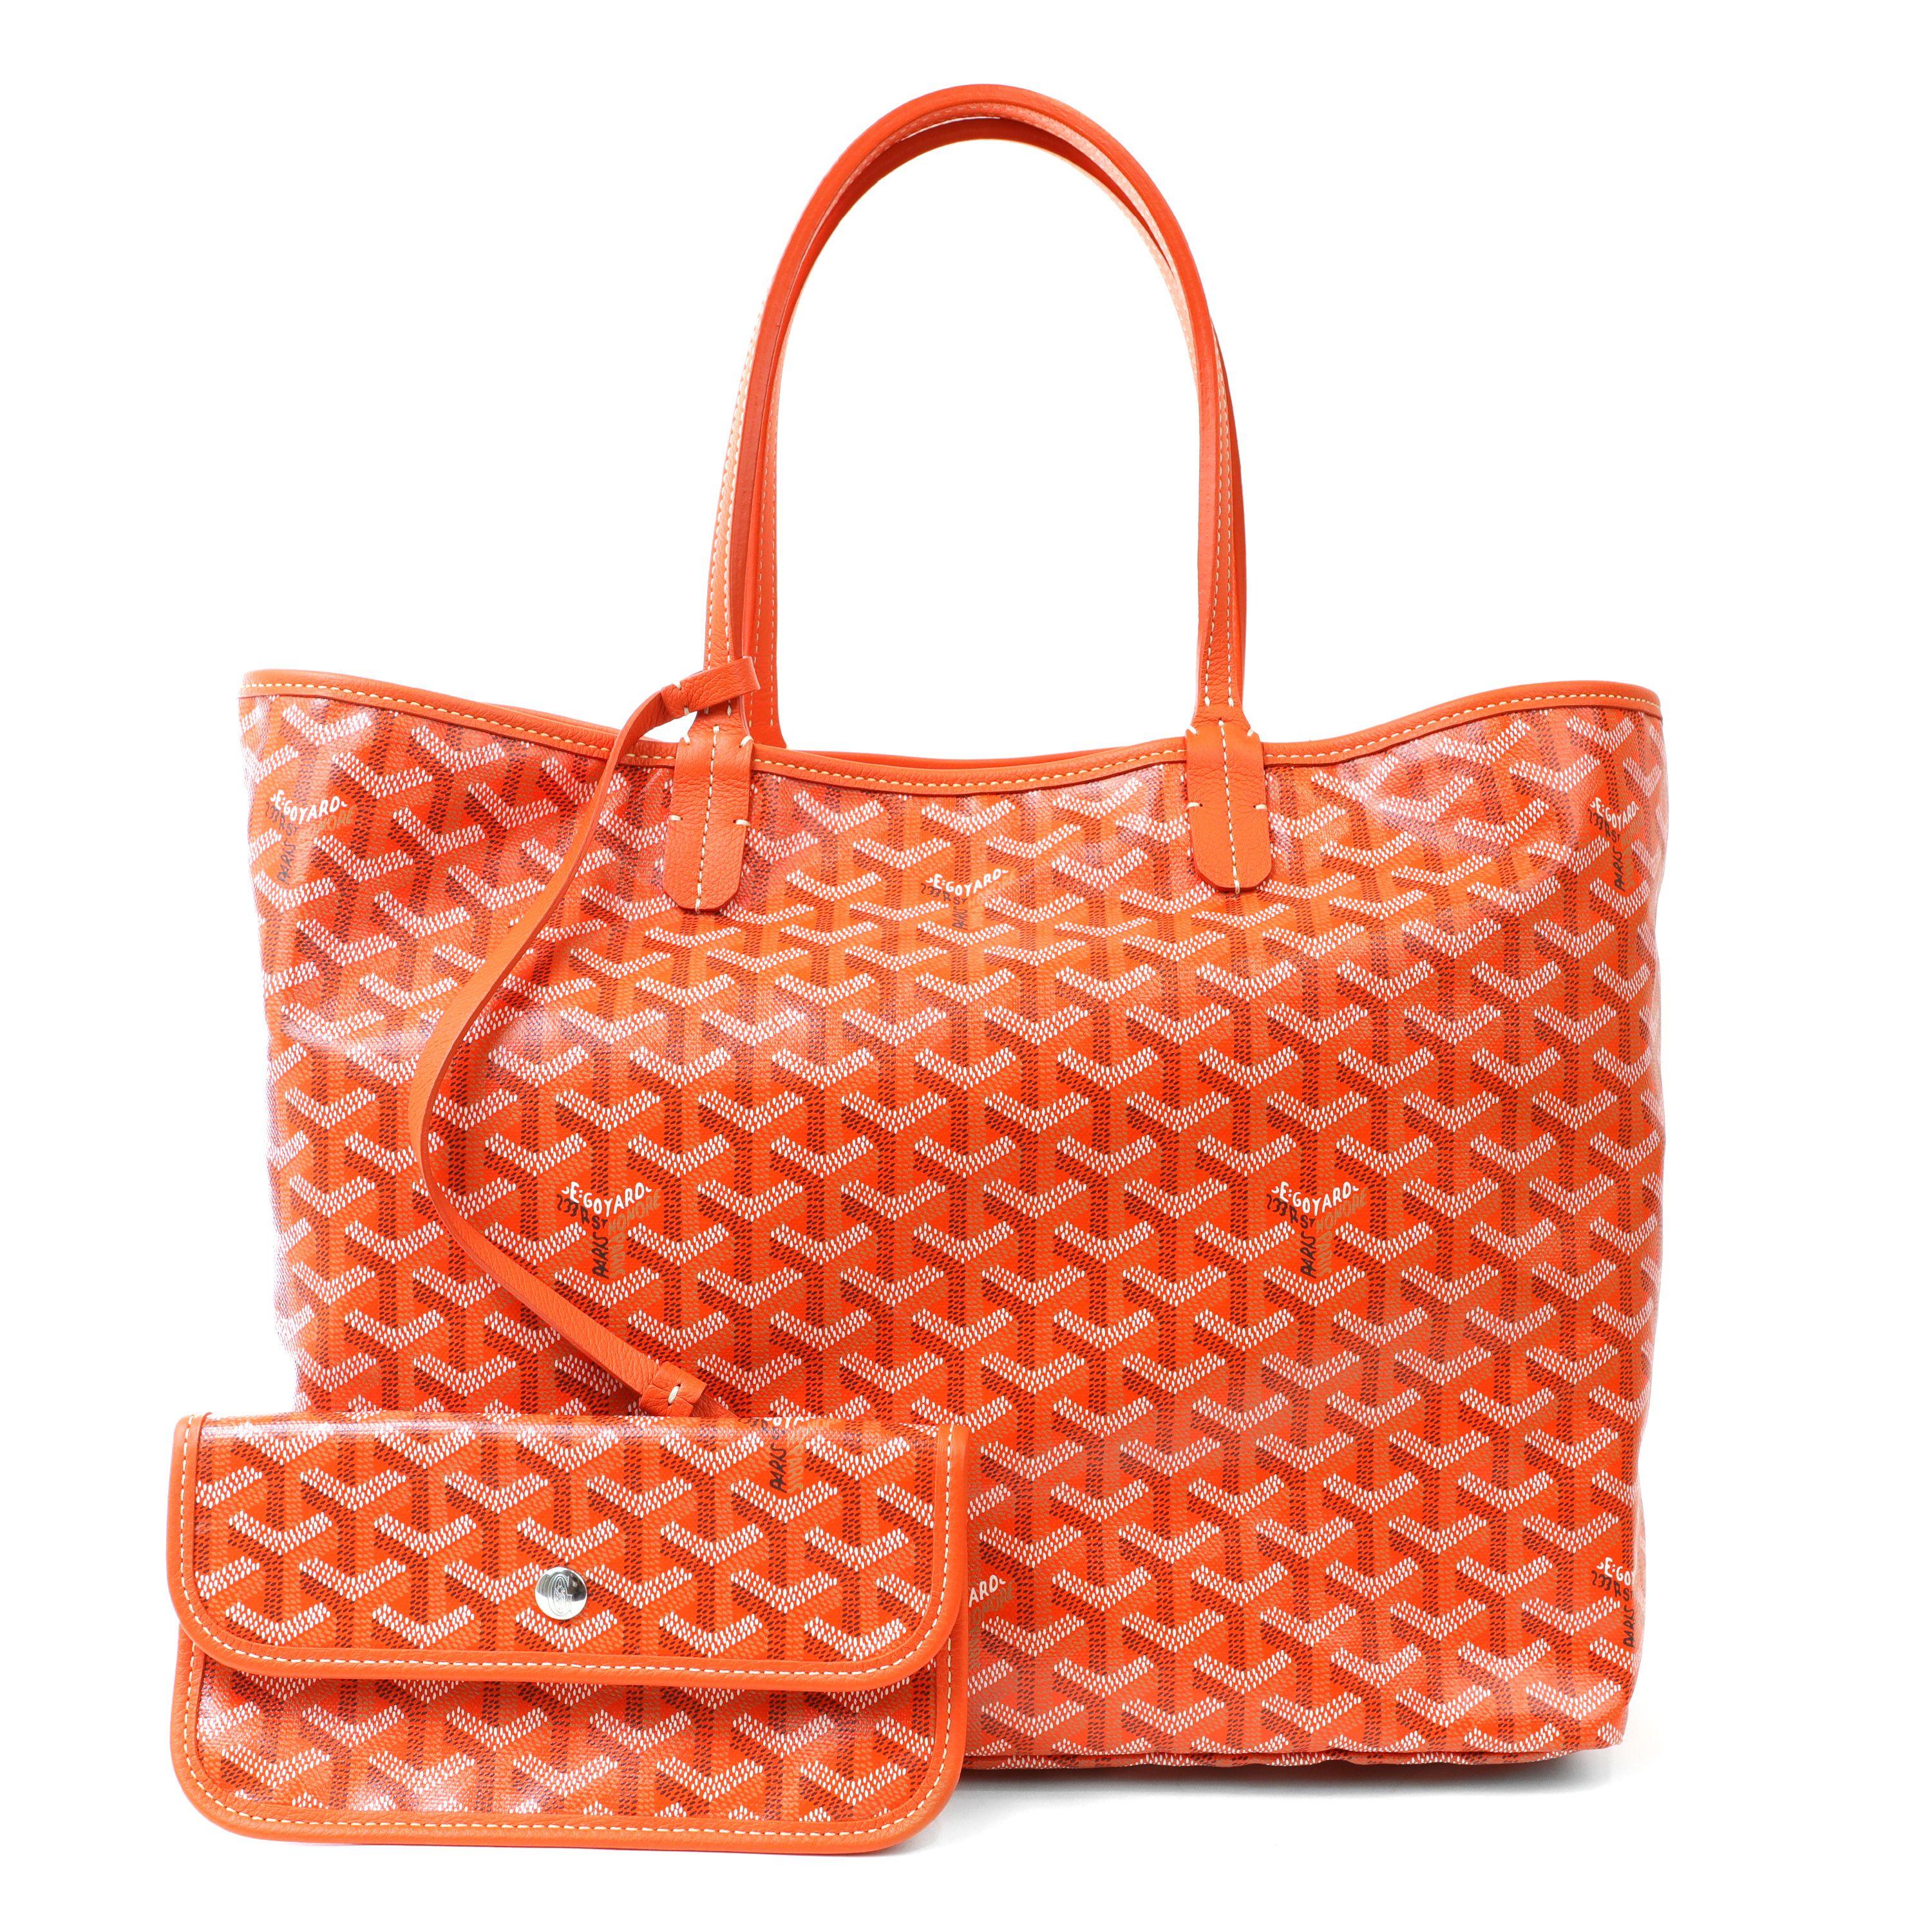 This authentic Goyard Orange St. Louis PM Striped Tote is in pristine condition, appearing never carried.  The iconic style features bright orange monogram coated hemp fabric with custom striping in white and aqua. Leather trim and handles with a